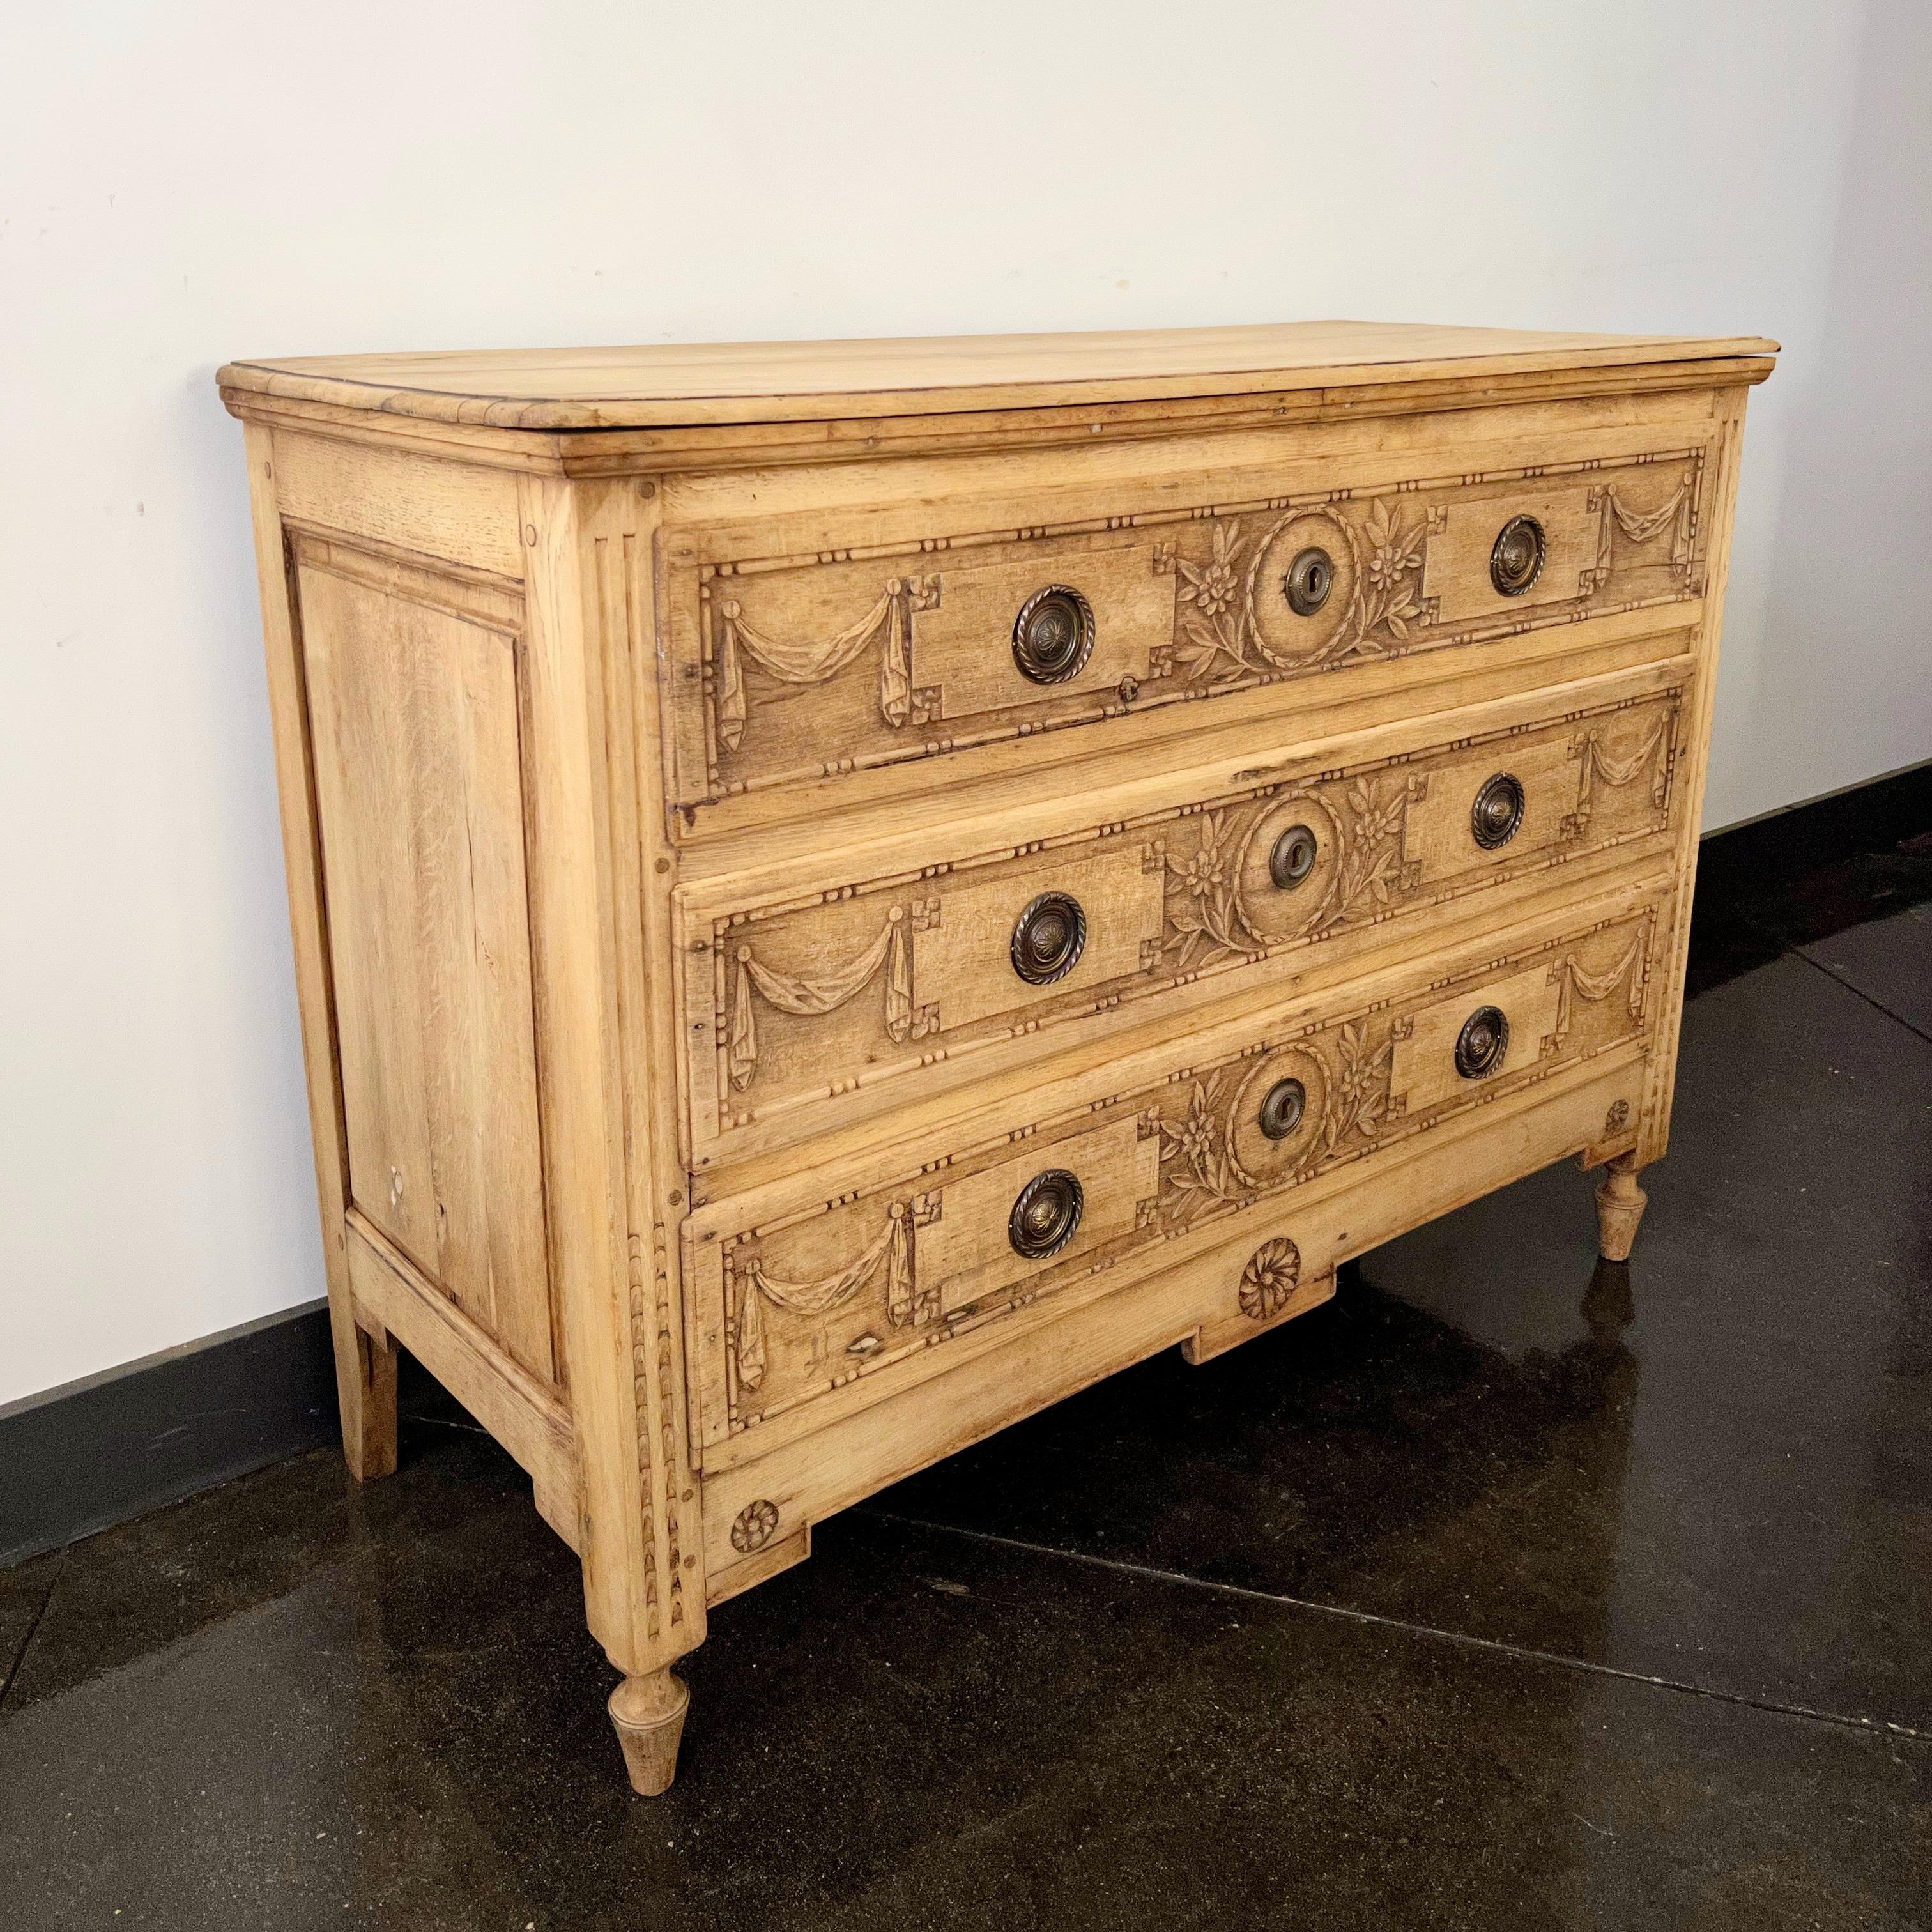 Belgian 18th Century Louis XVI Period Commode with Liege Carvings